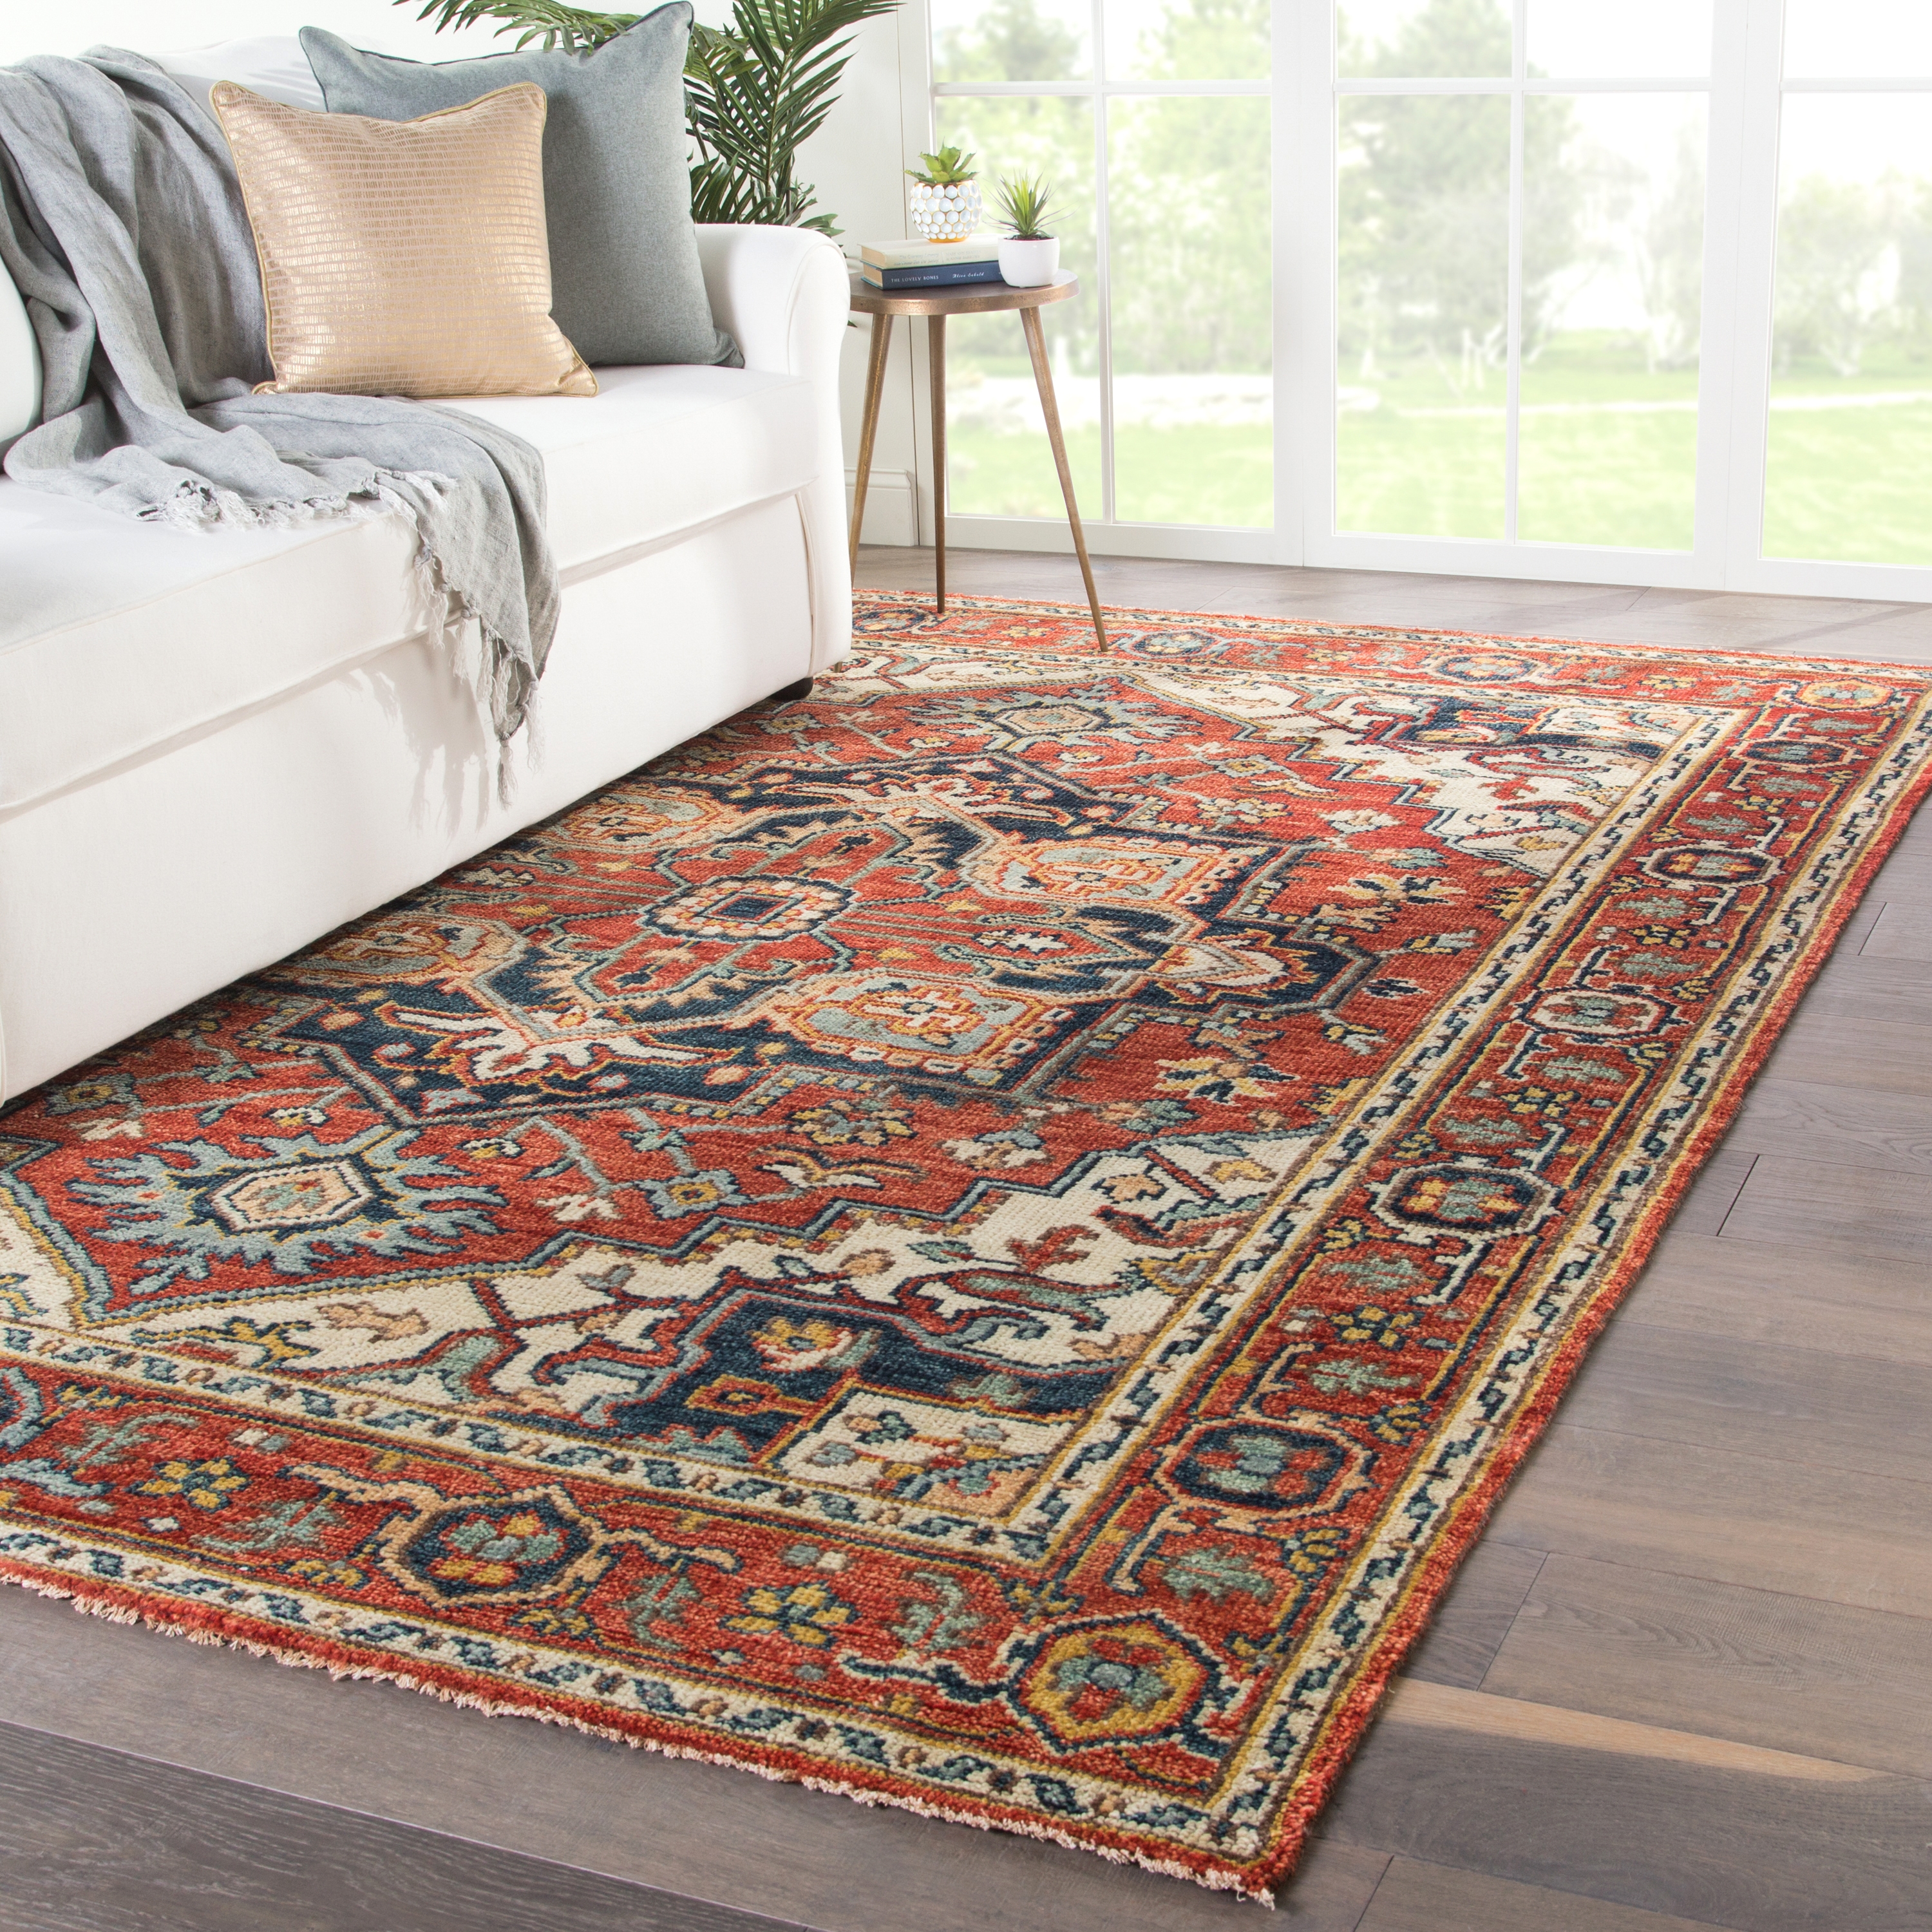 Willa Hand-Knotted Medallion Red/ Multicolor Area Rug (6'X9') - Image 4